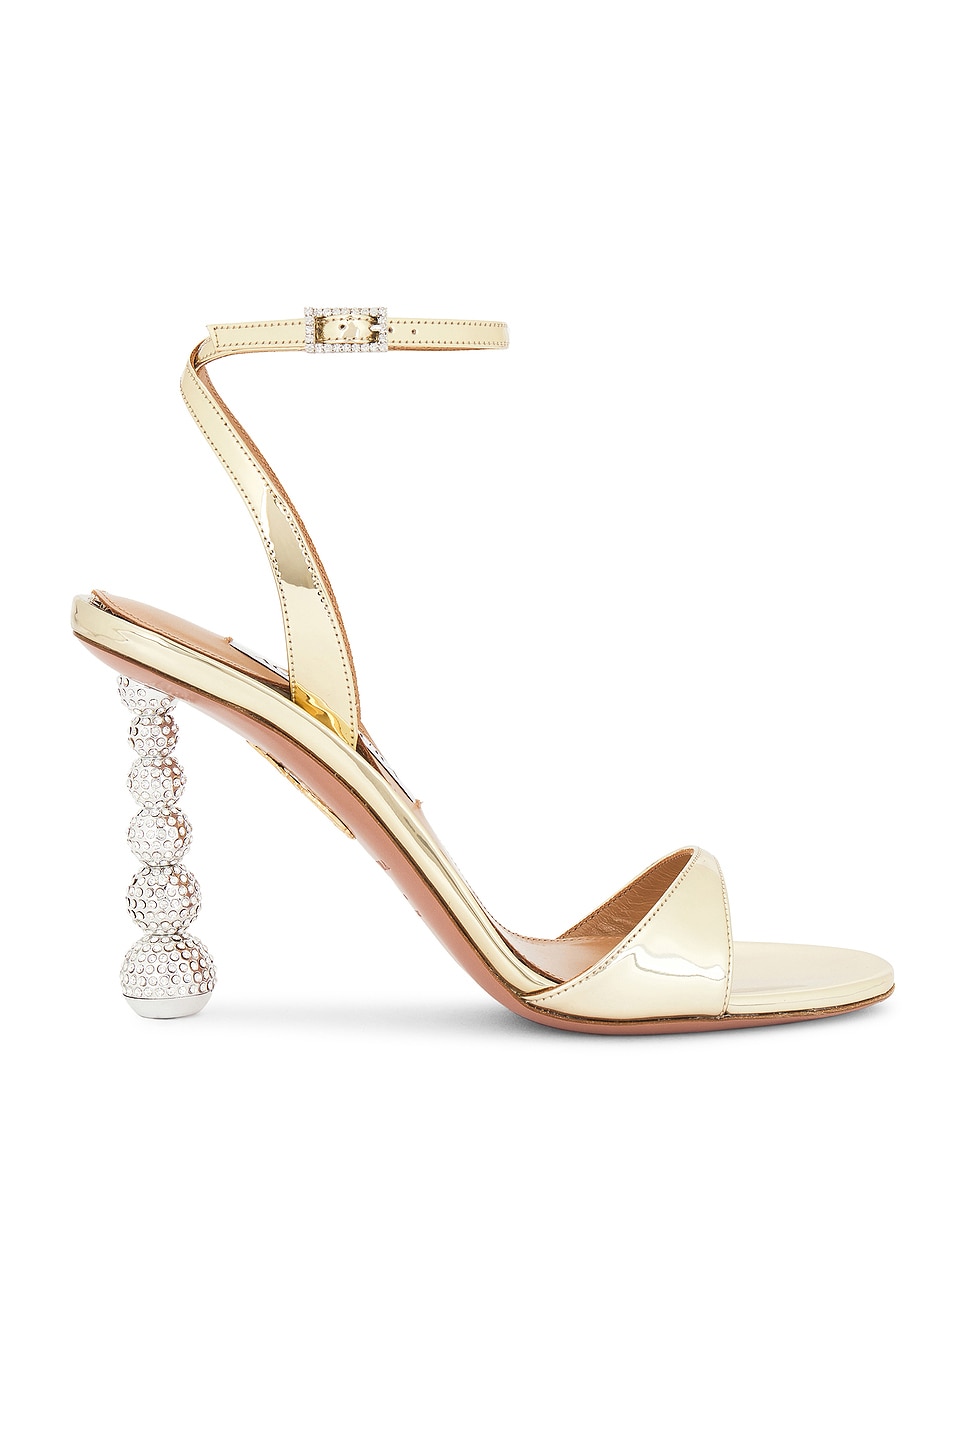 Image 1 of Aquazzura Yes Baby 95 Sandal in Soft Gold